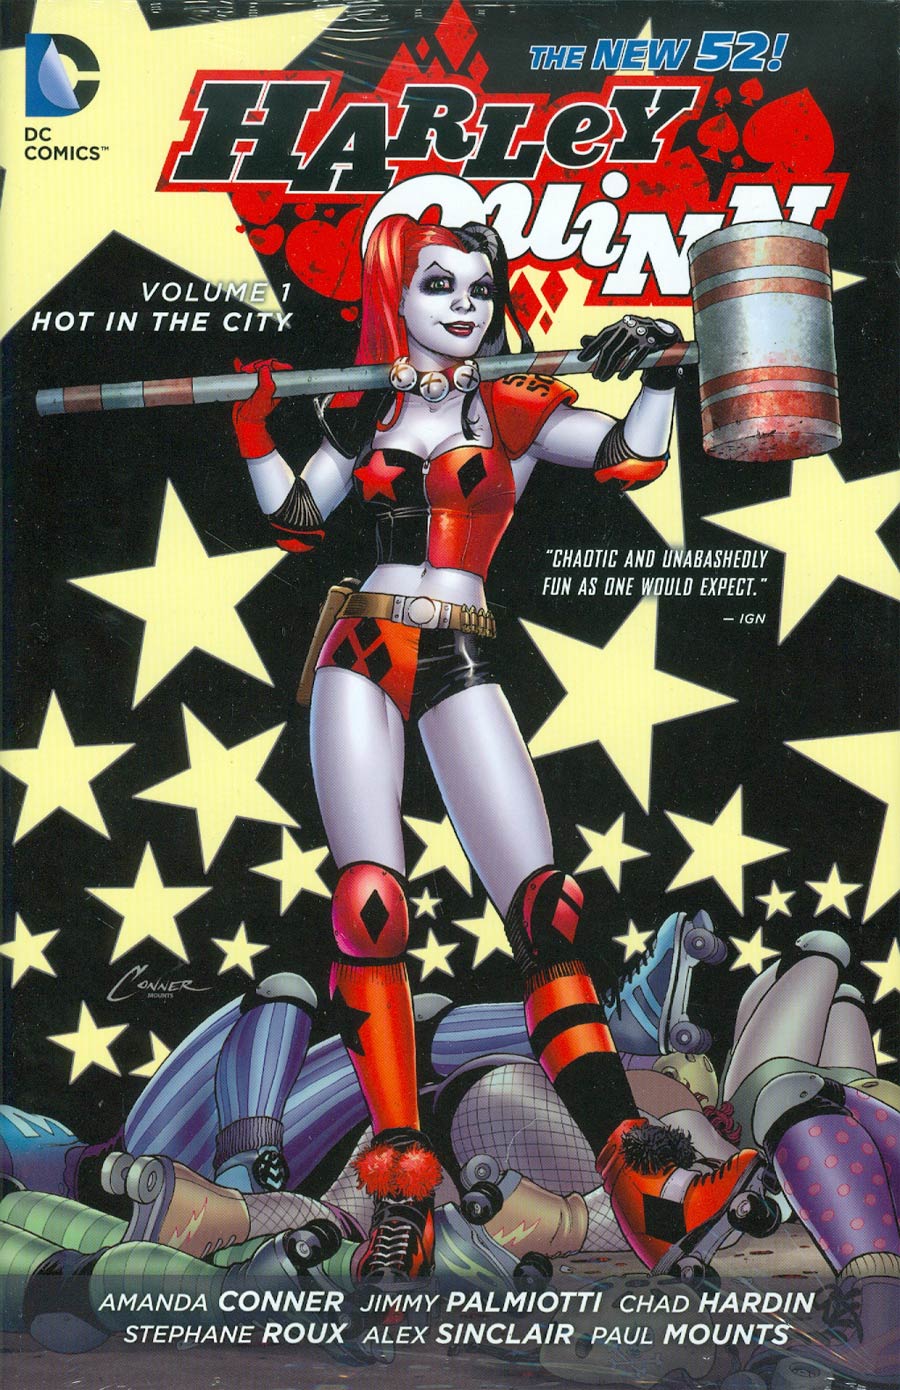 Harley Quinn (New 52) Vol 1 Hot In The City HC